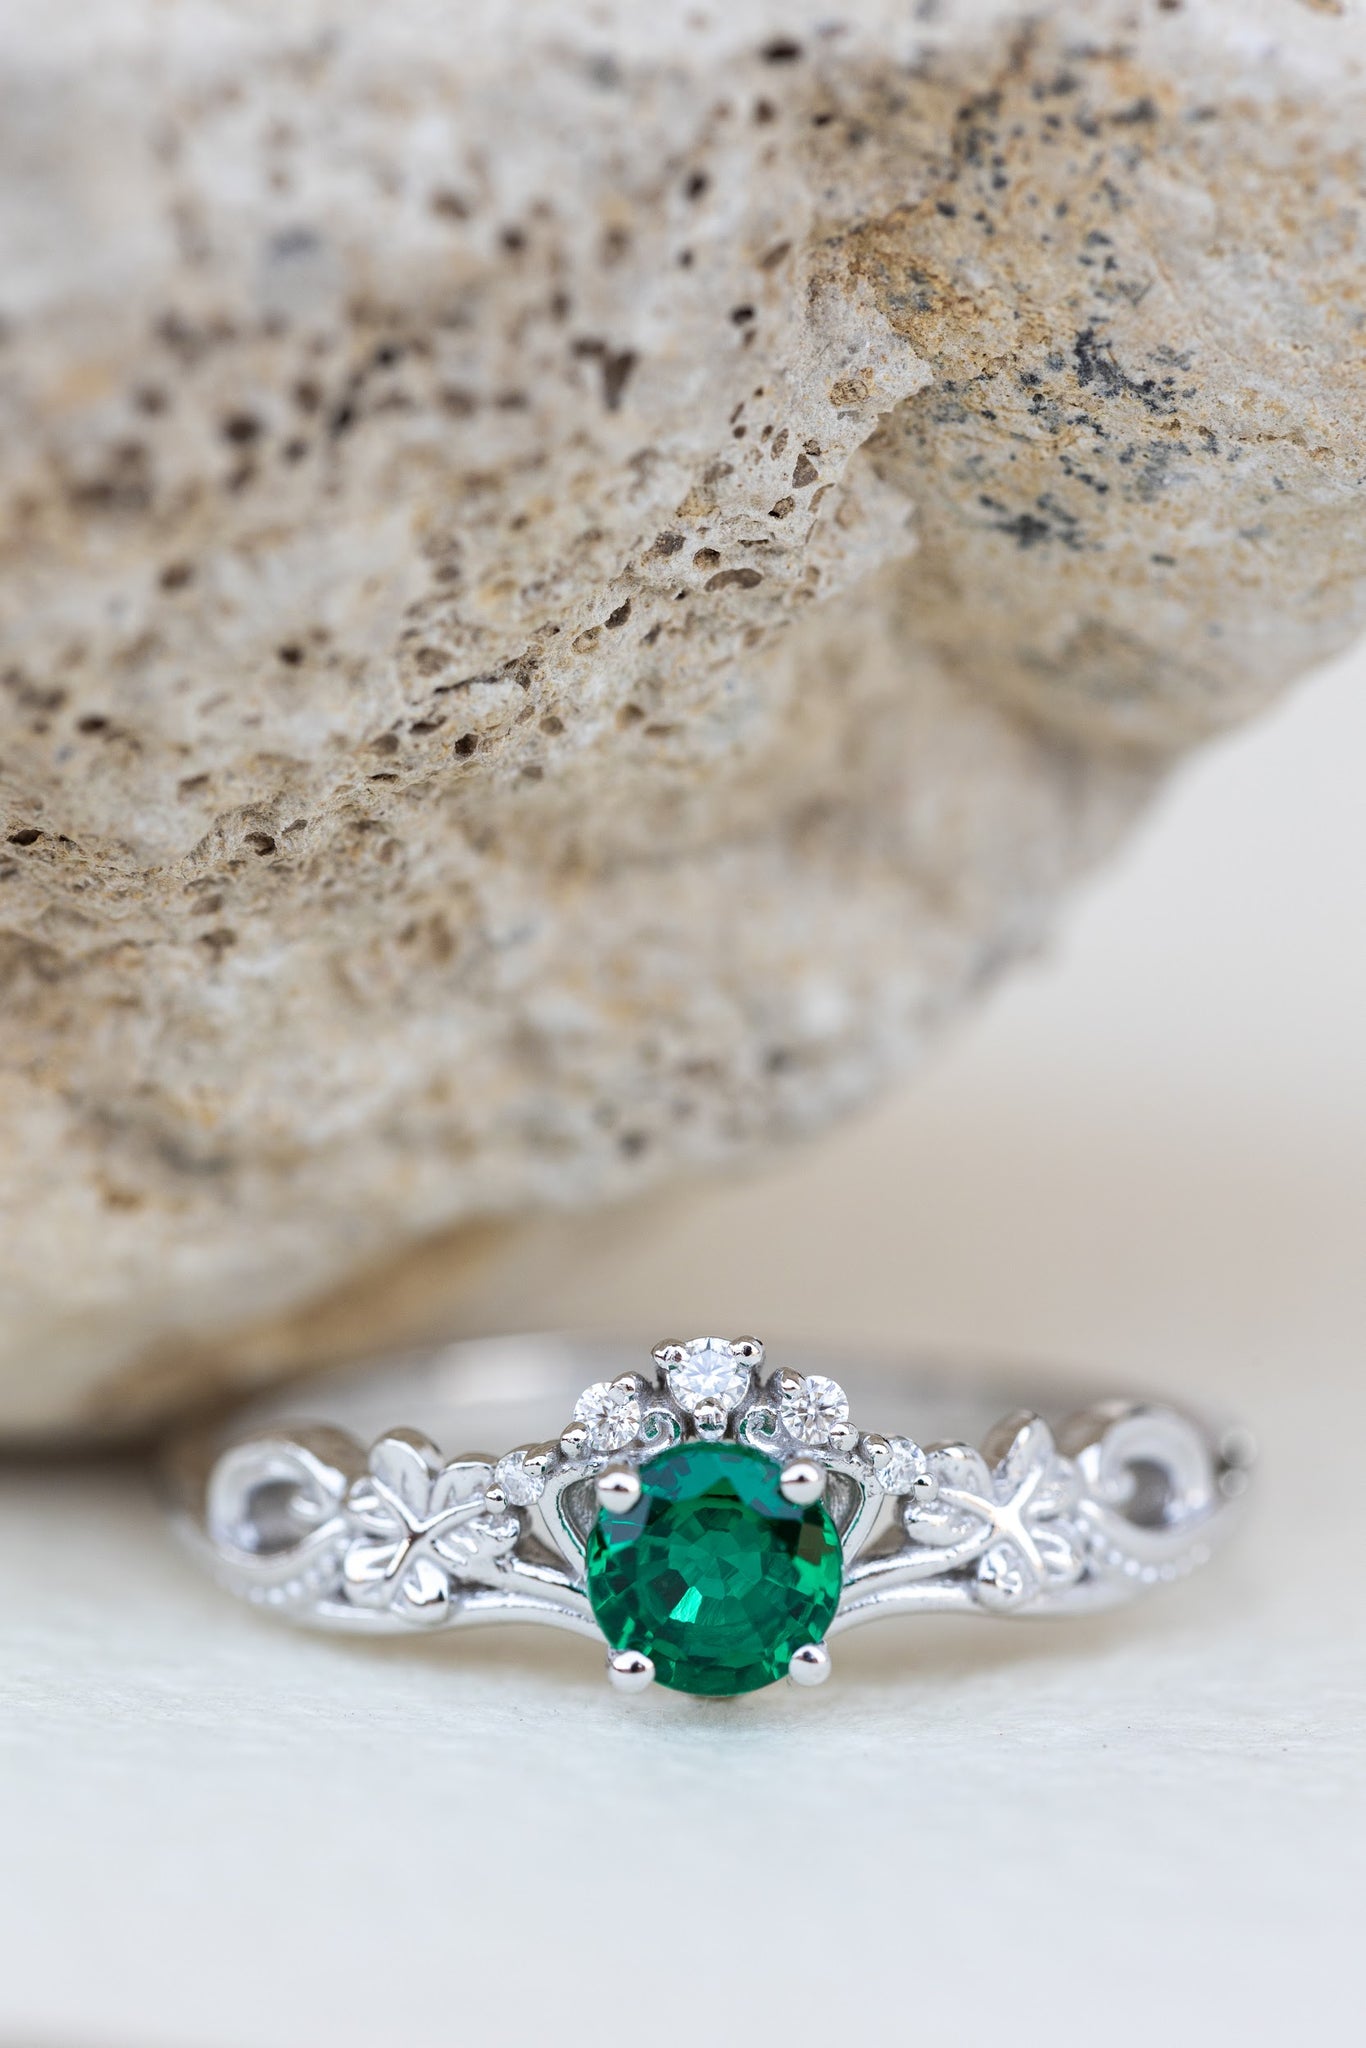 Lab created emerald engagement ring, celtic proposal ring with diamonds / Horta - Eden Garden Jewelry™